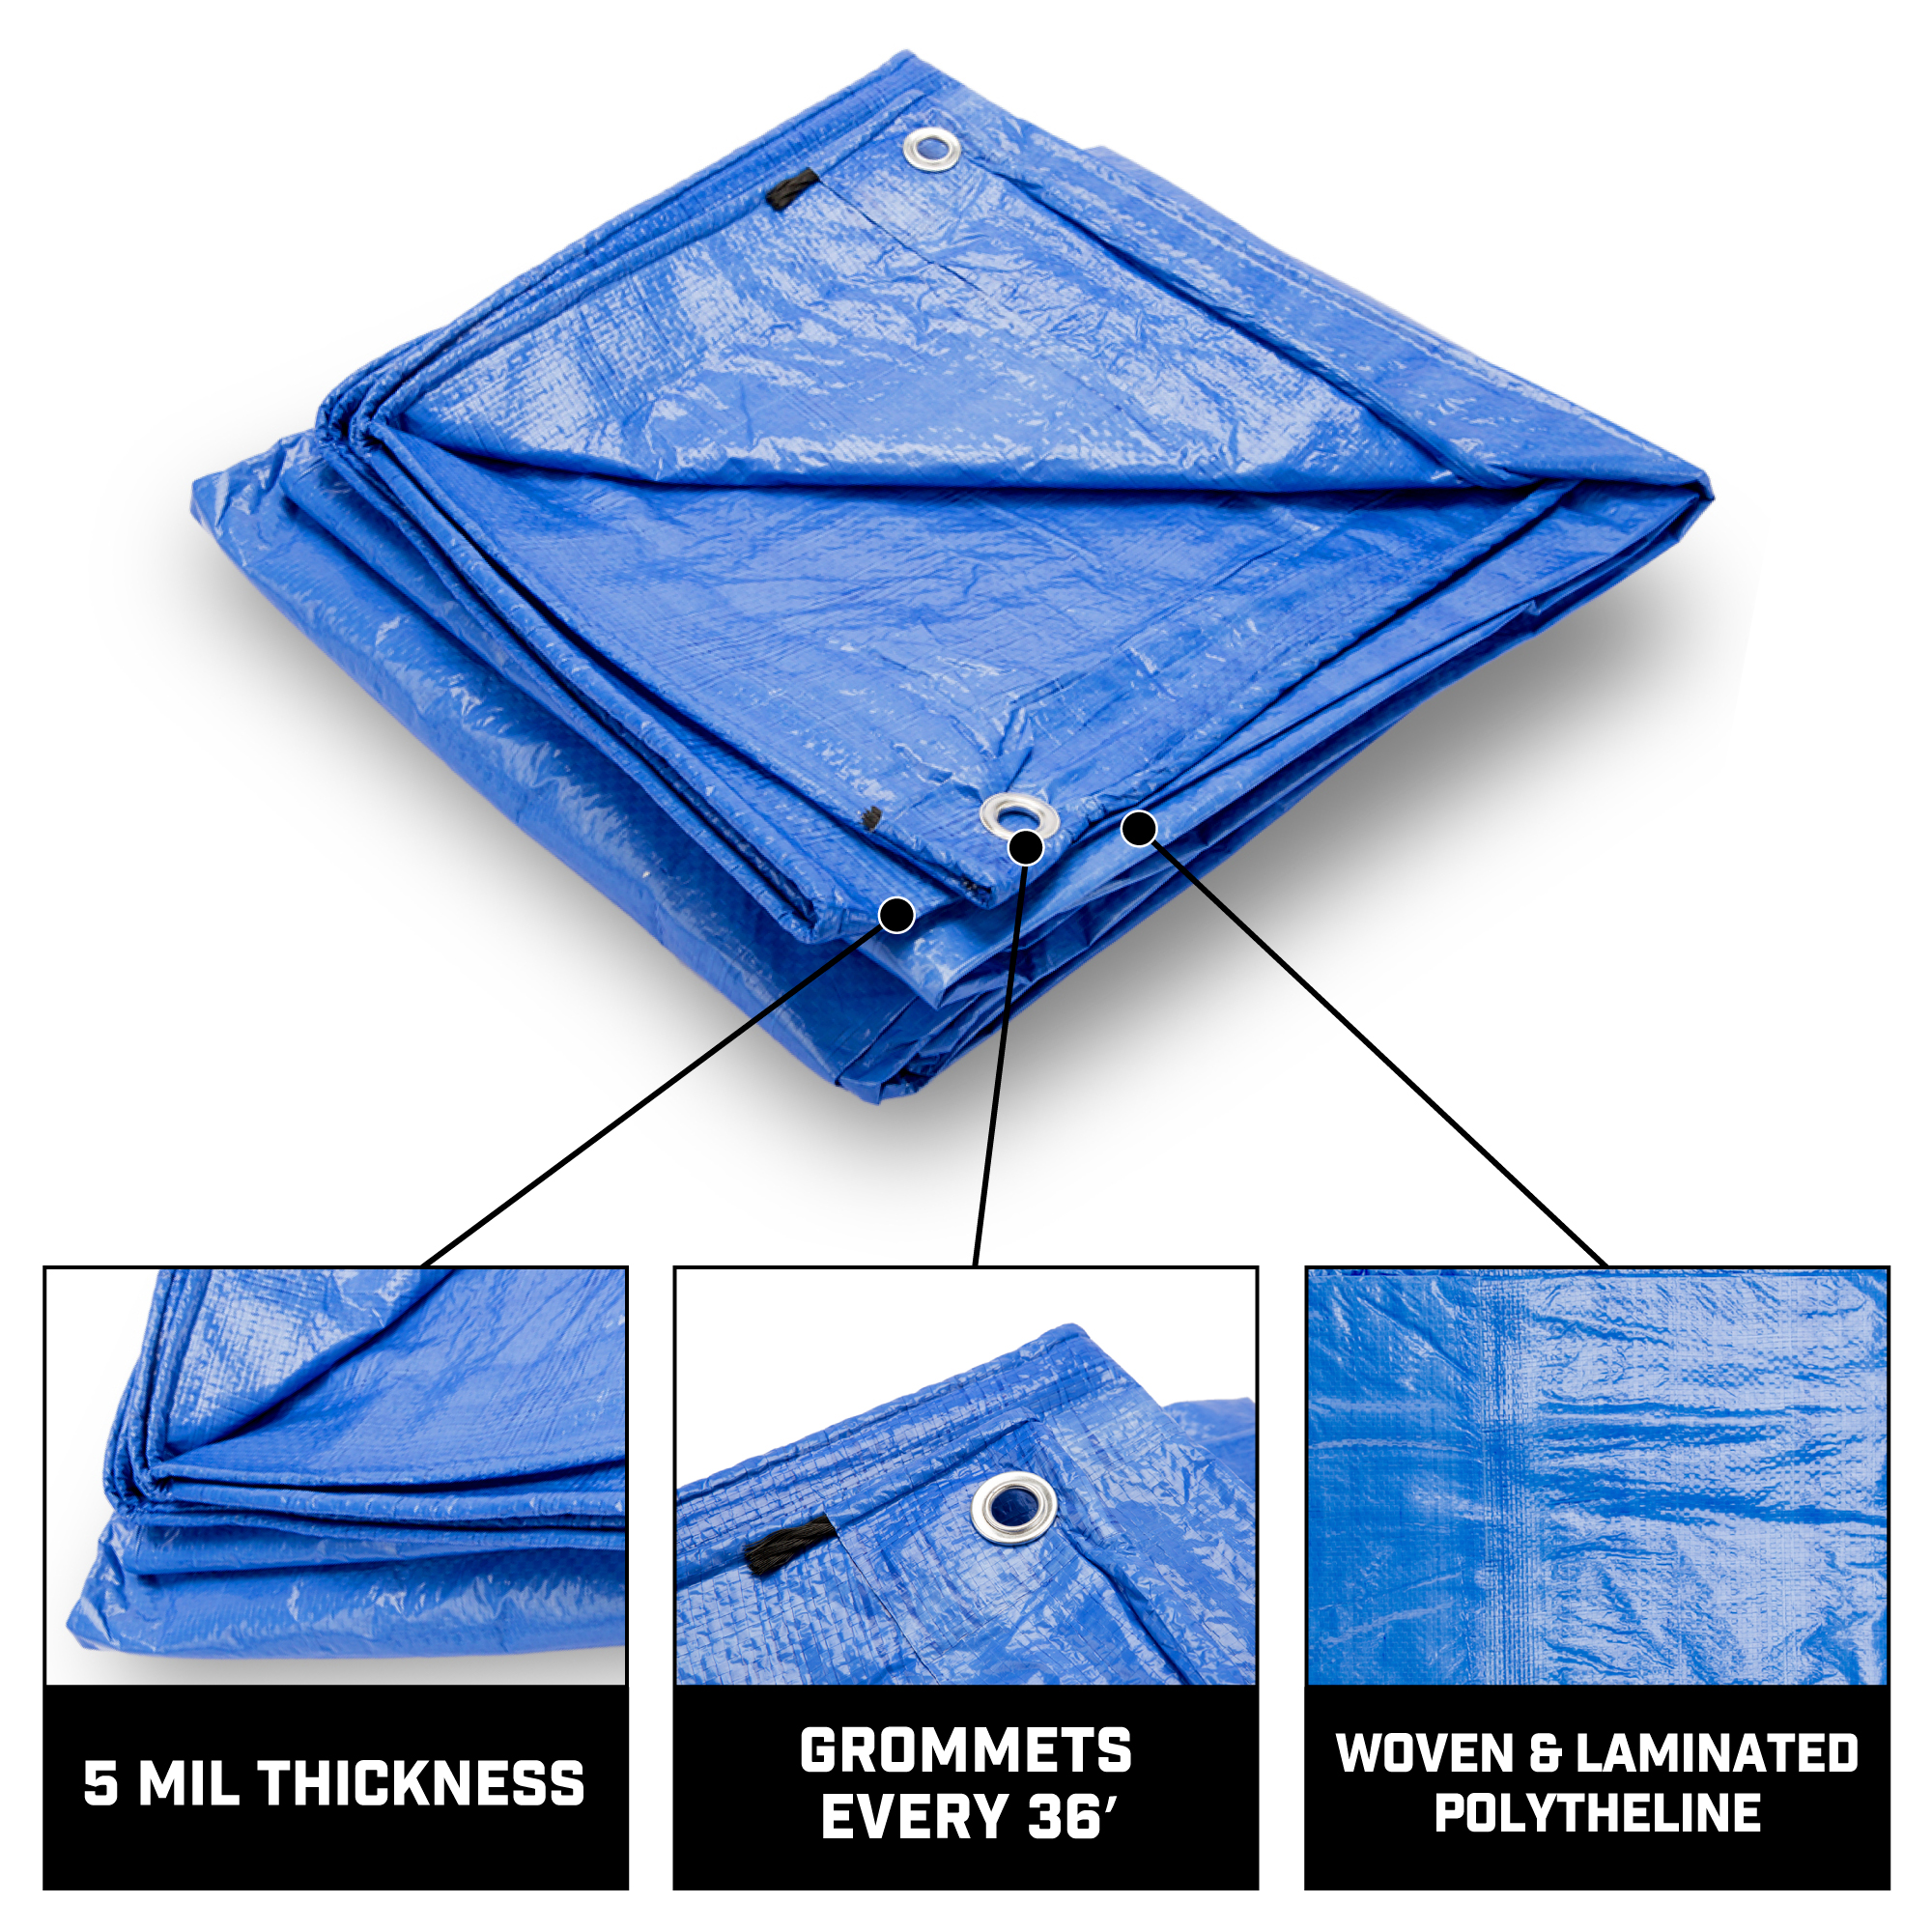 B-Air Grizzly Tarps 5 x 7 Feet Blue Multi Purpose Waterproof Poly Tarp Cover 5 Mil Thick 8 x 8 Weave - image 2 of 4